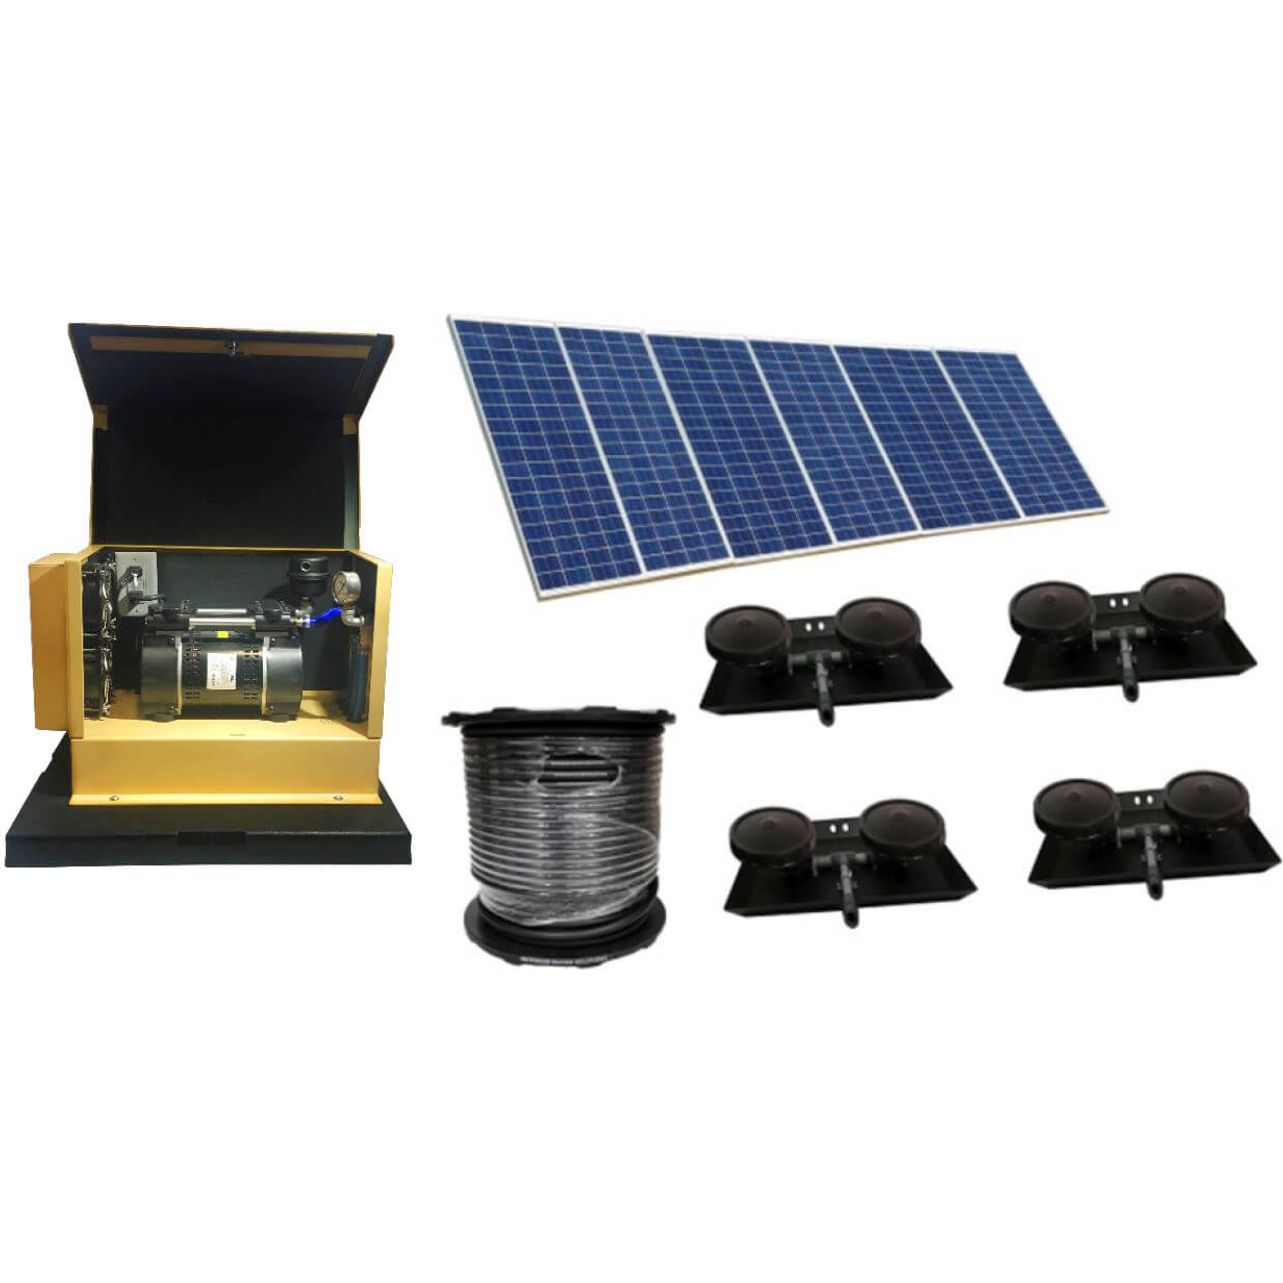 EasyPro SASD34 Deep Water Solar Aeration Complete System – Up to 4 acres